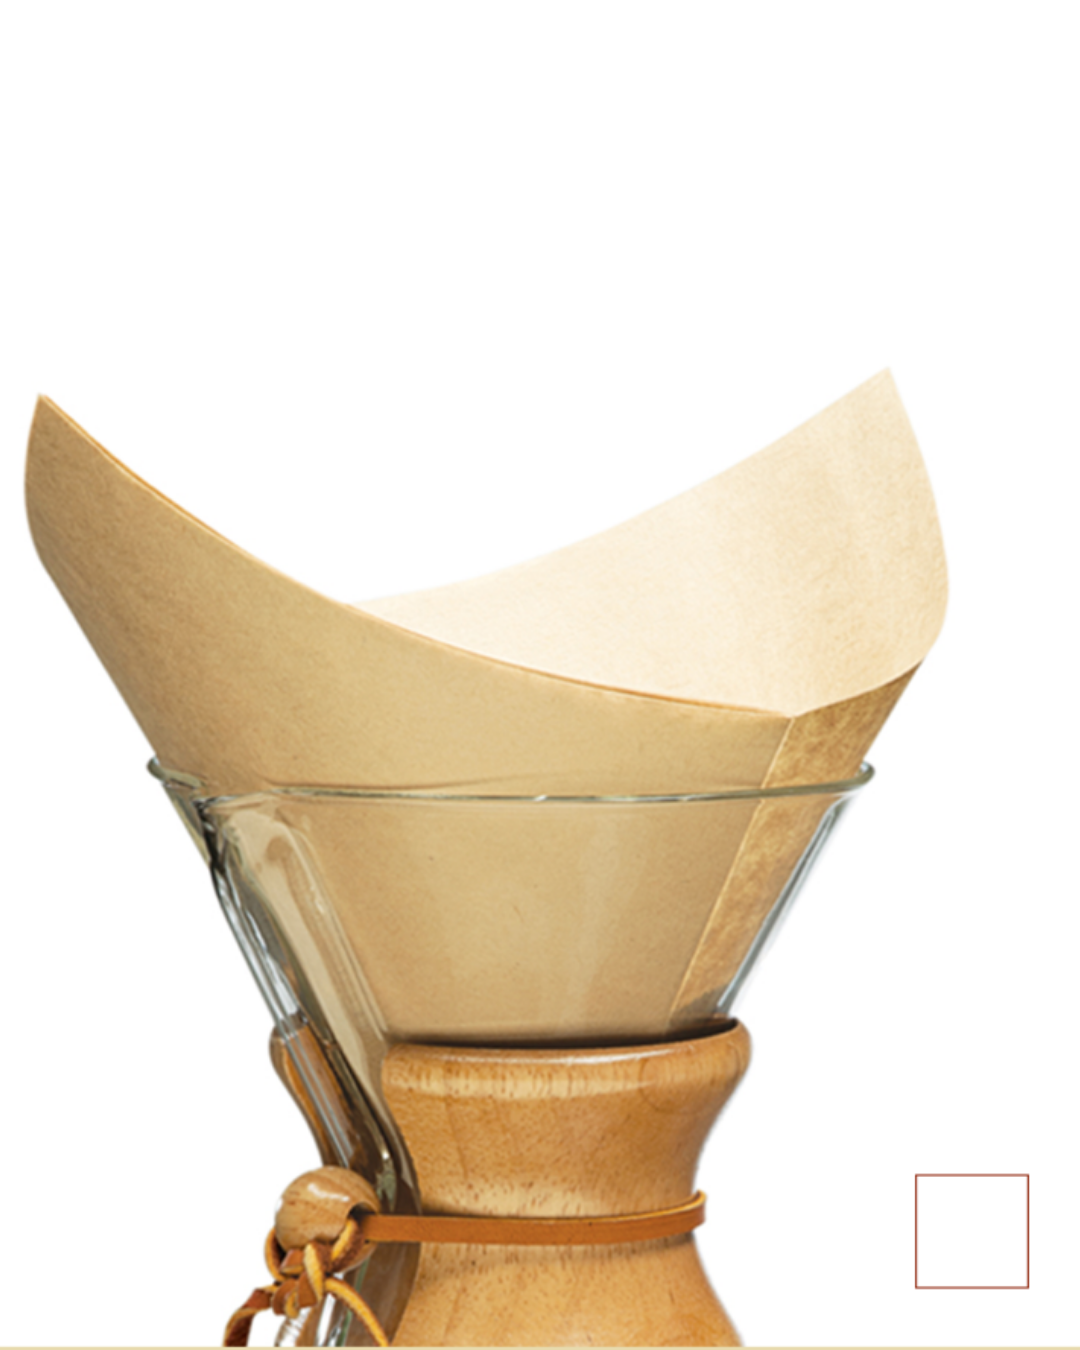 CHEMEX® Bonded Filters Pre-Folded Squares (Natural)